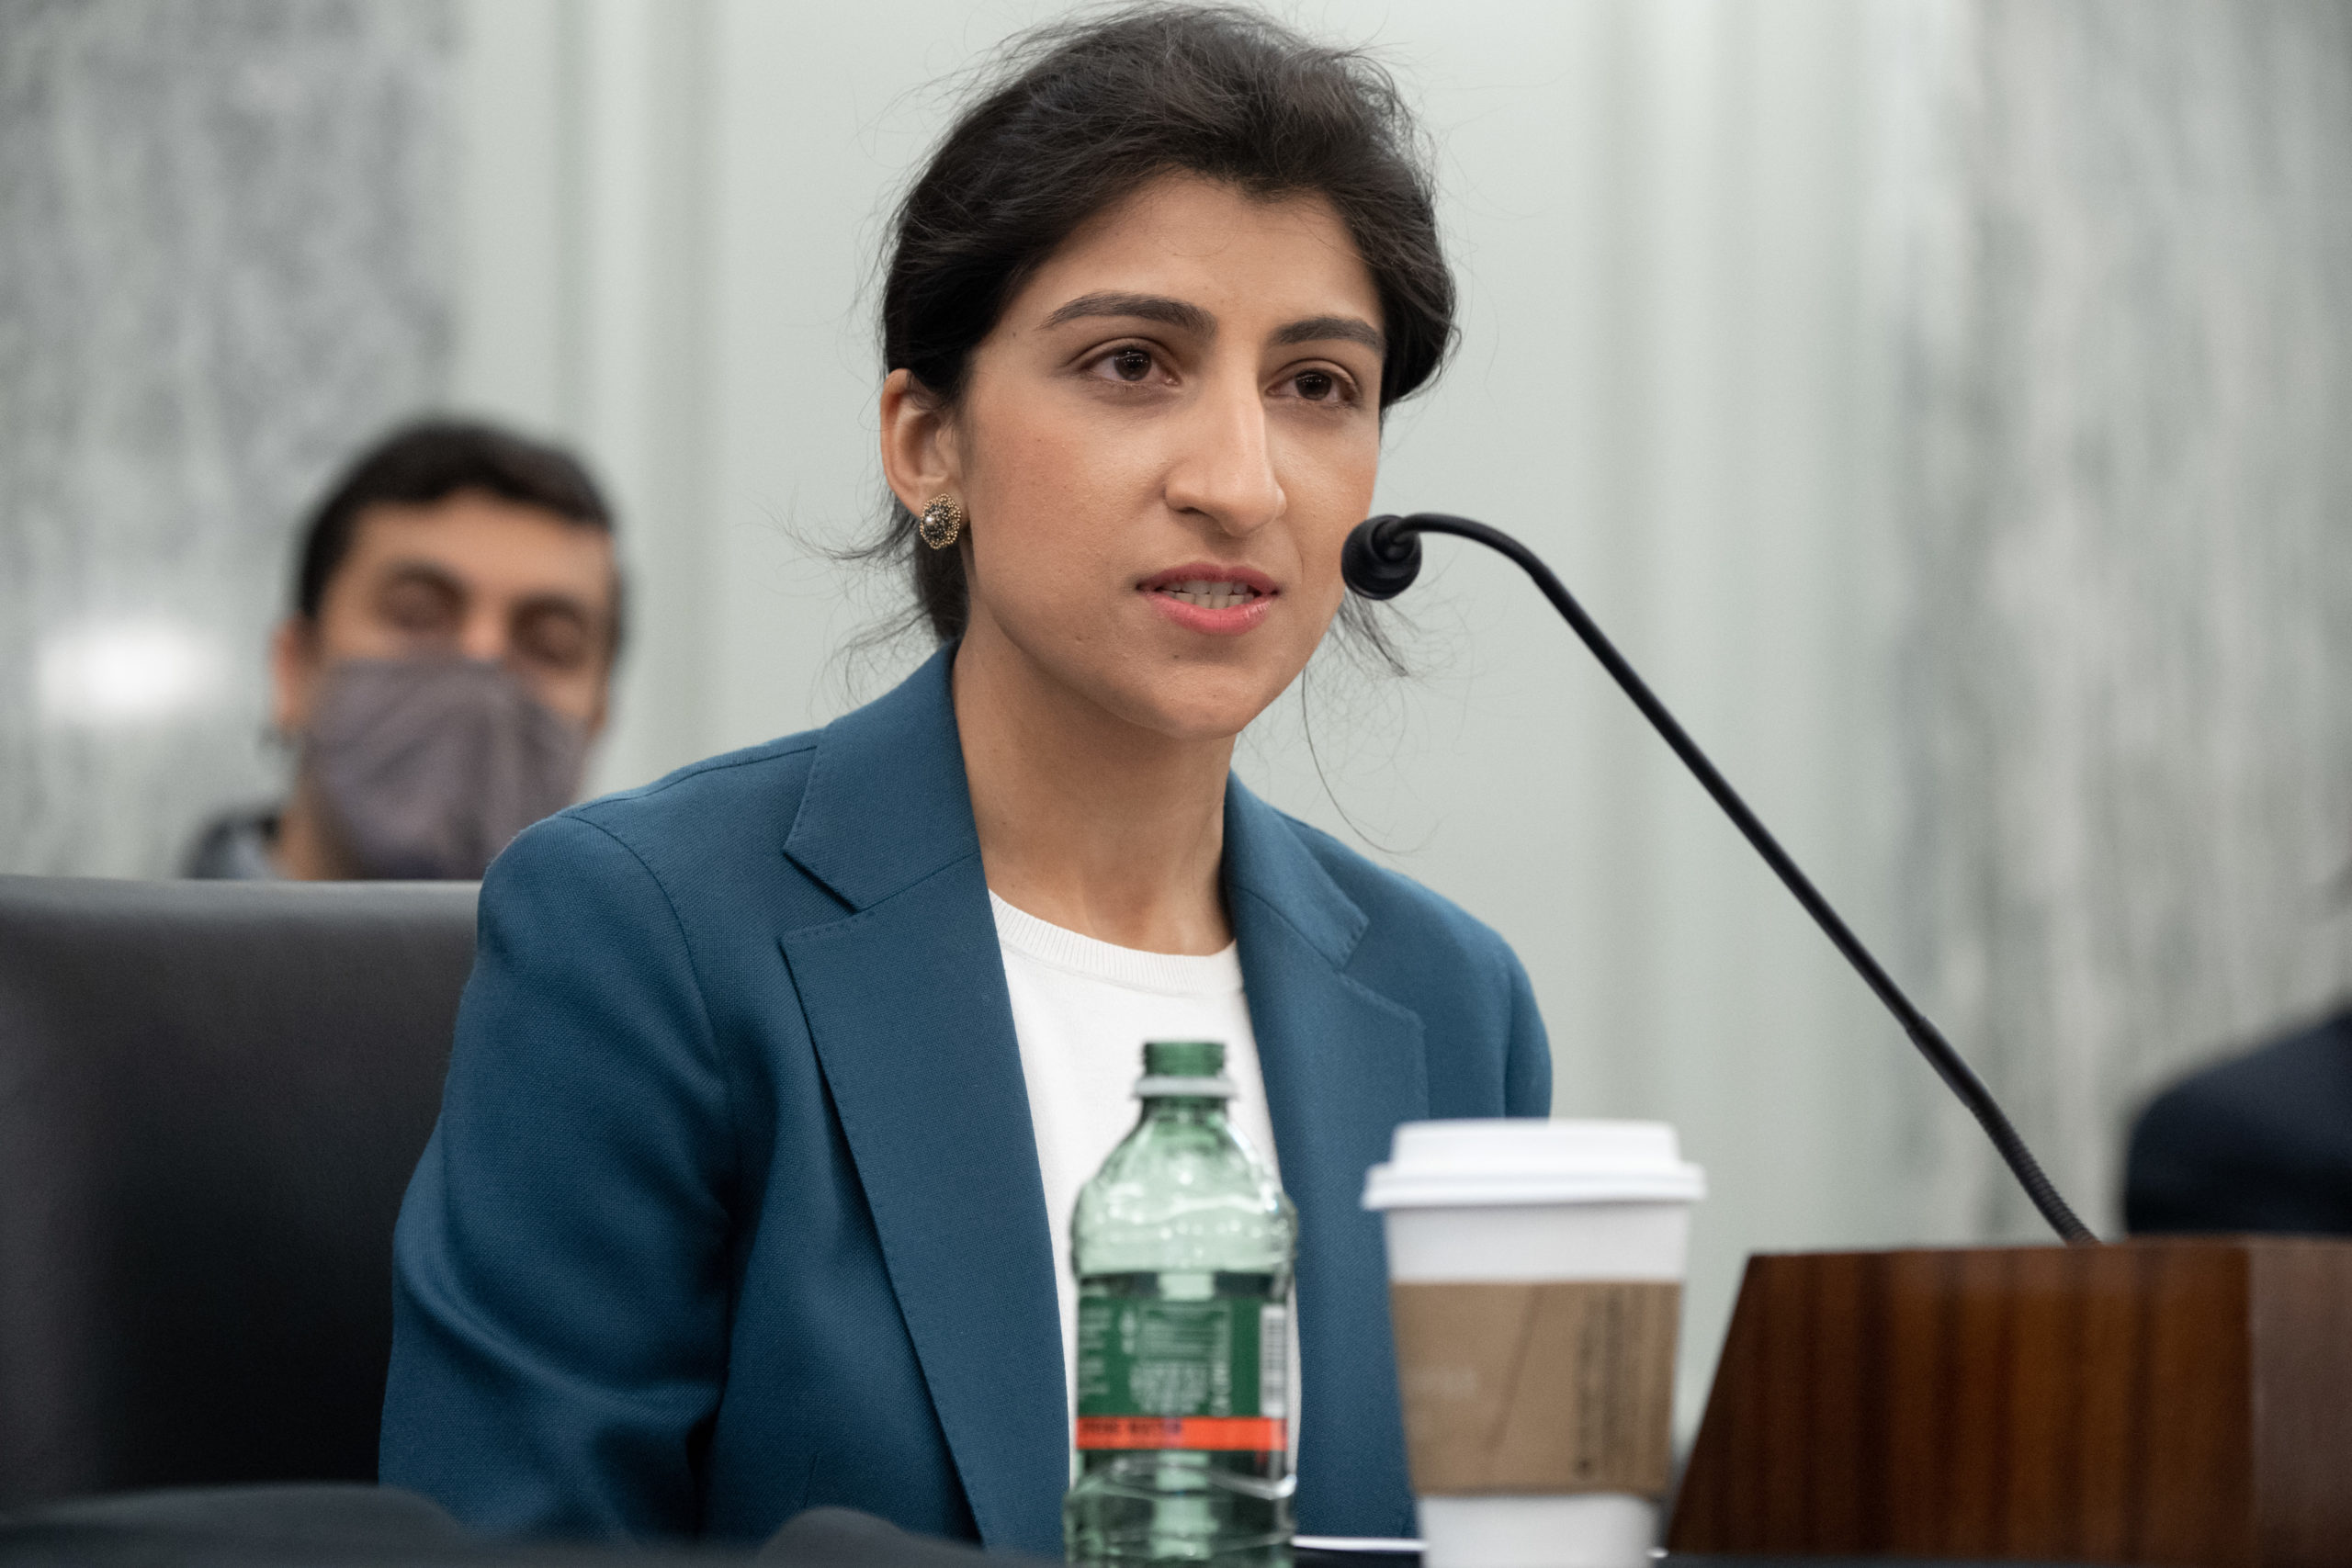 WASHINGTON, DC - APRIL 21: Lina Khan, nominee for Commissioner of the Federal Trade Commission (FTC), speaks at a Senate Committee on Commerce, Science, and Transportation confirmation hearing on Capitol Hill on April 21, 2021 in Washington, DC. Khan is an associate professor at Columbia Law School. (Photo by Saul Loeb-Pool/Getty Images)